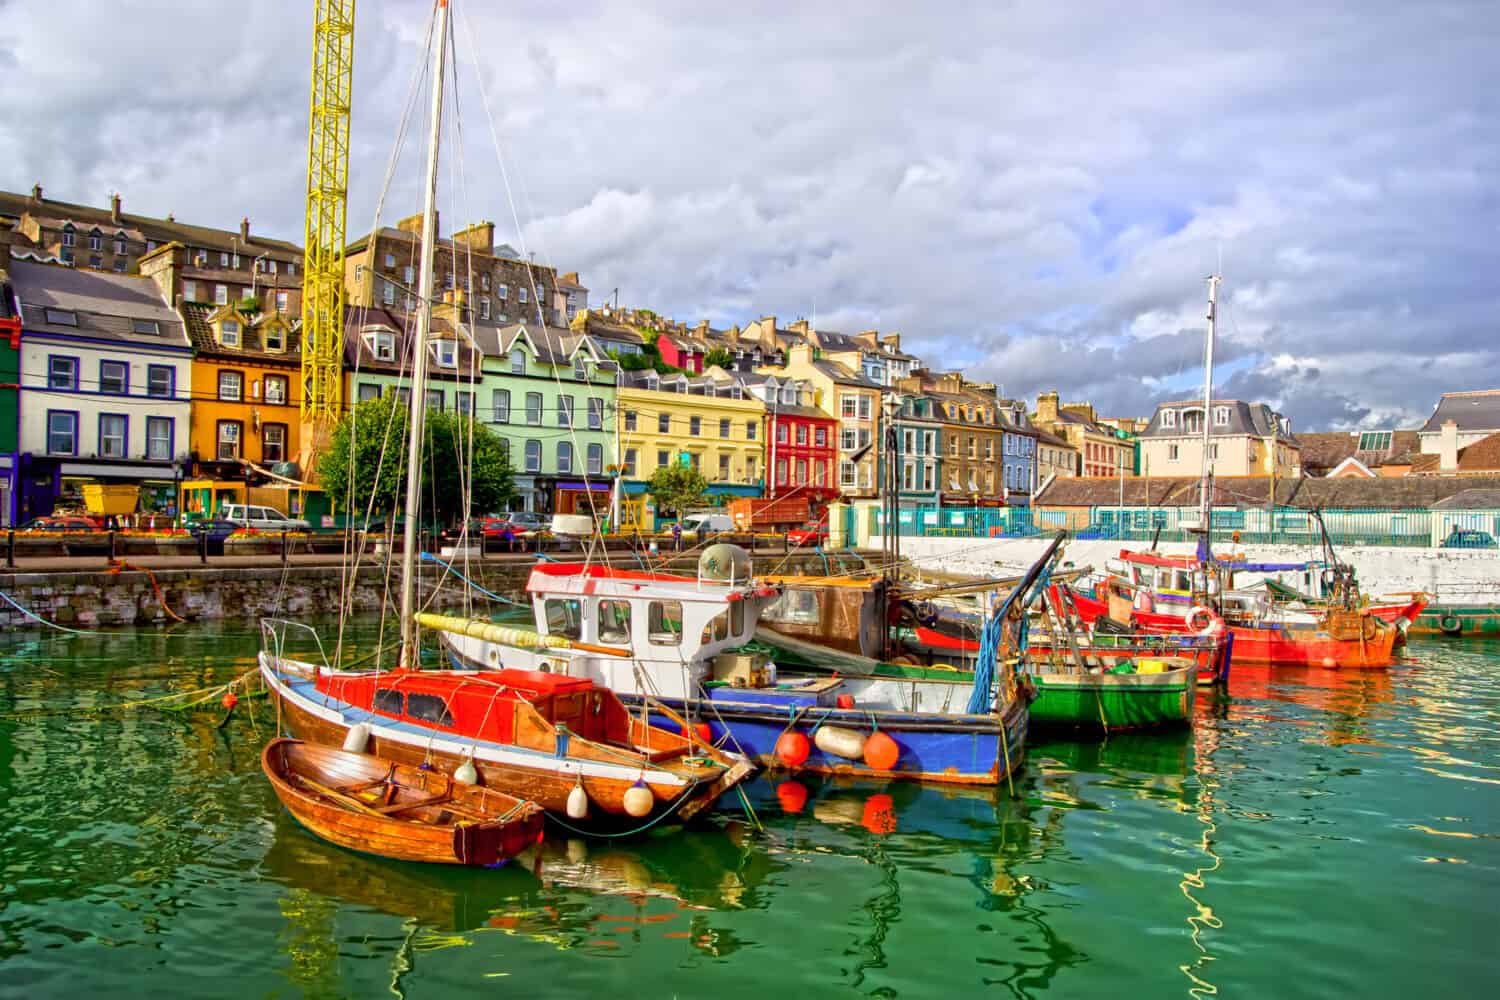 Picturesque scenery of the Cobh town harbour in Ireland, Cork County, HDR technique